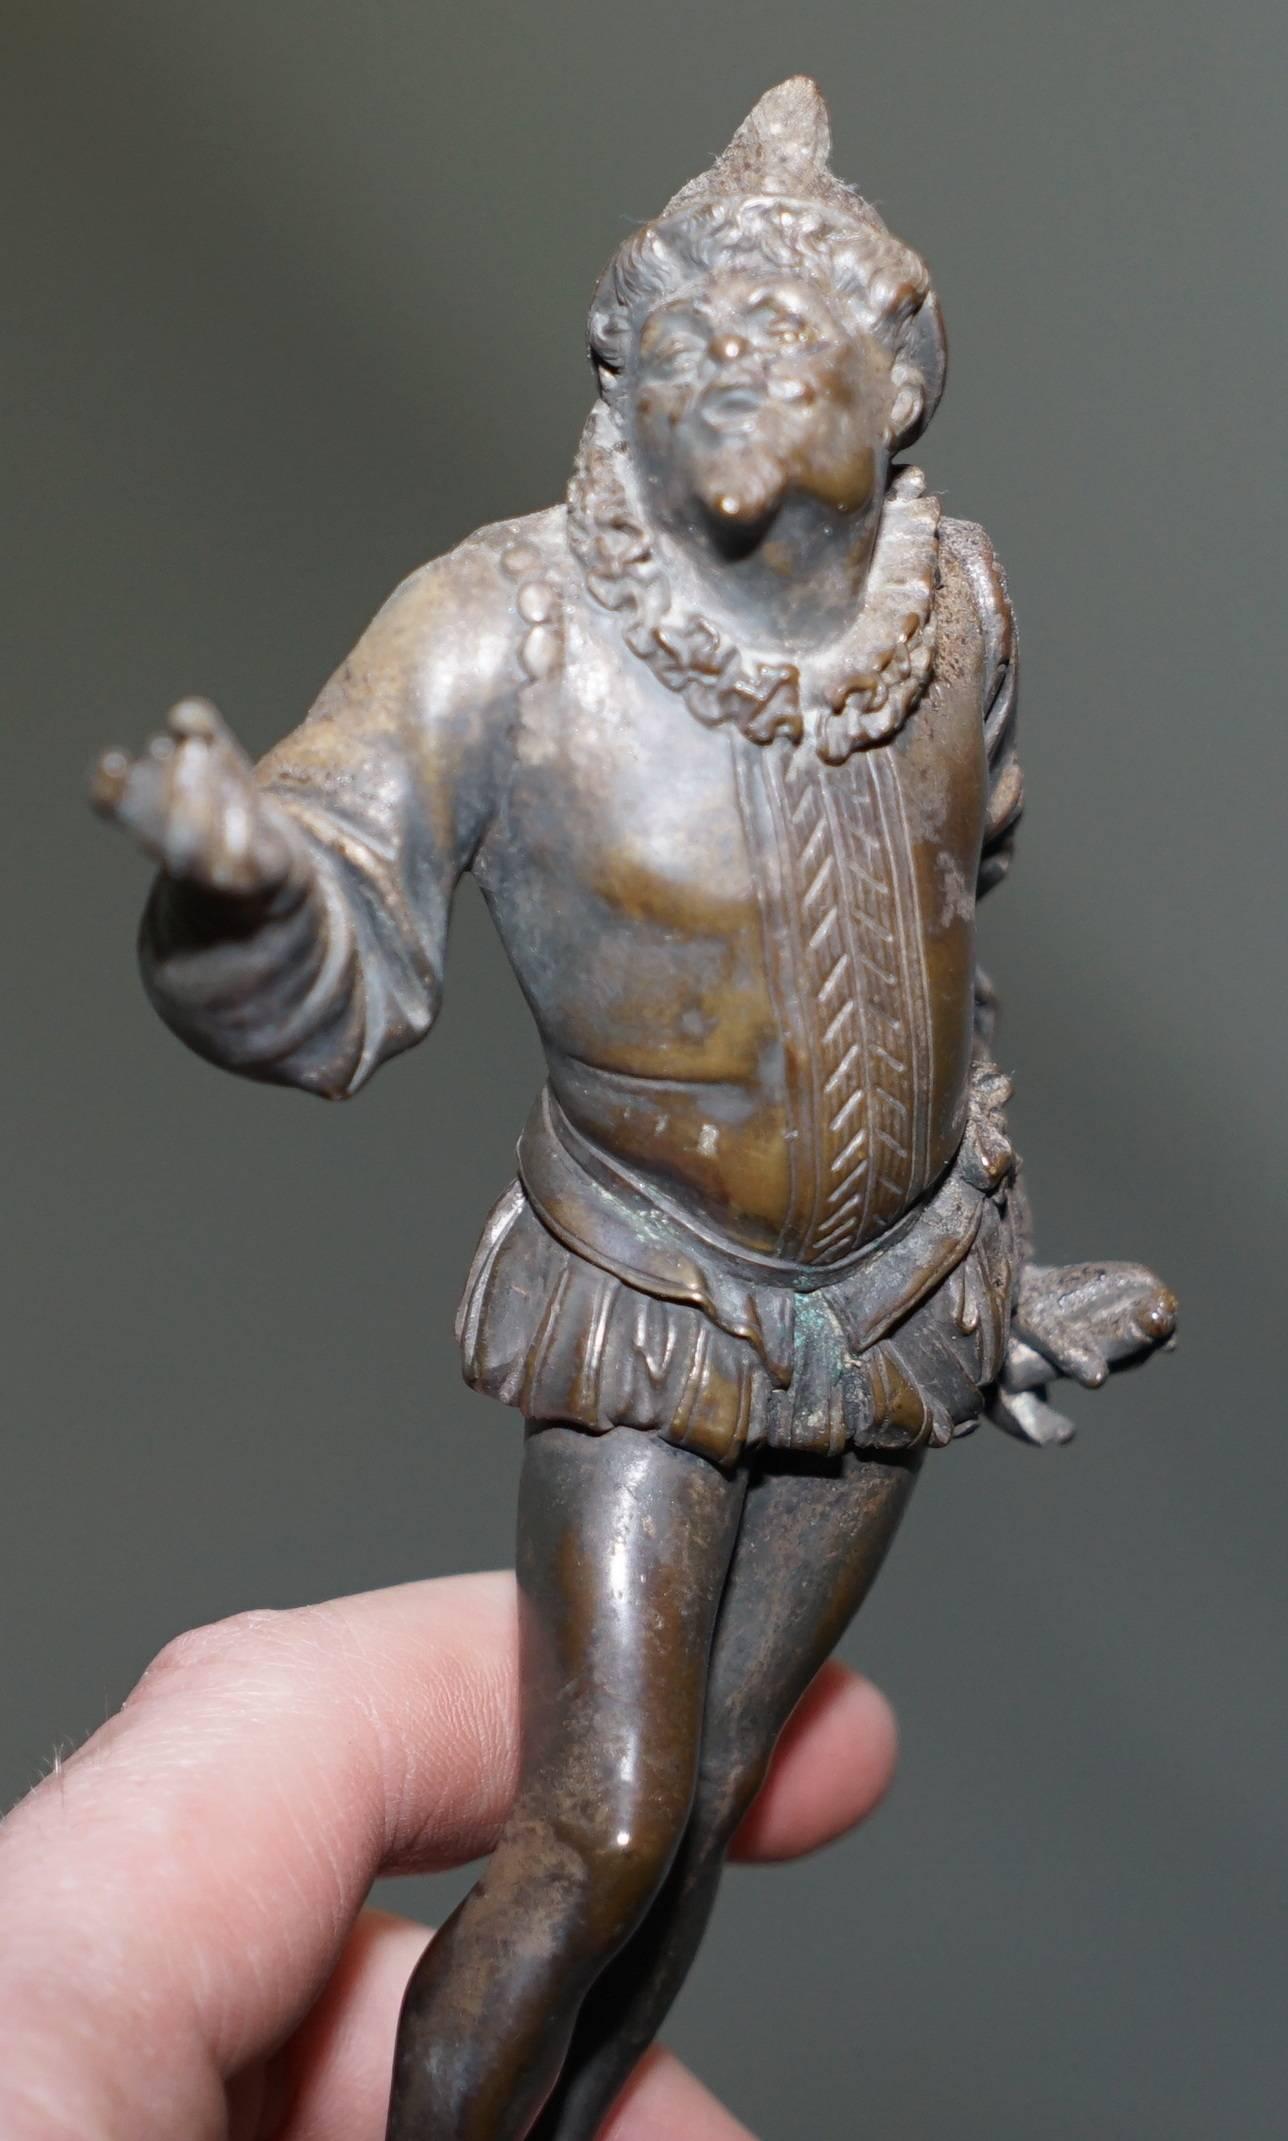 Pair of Antique Bronze Statues of Chaps Getting Ready to Duel Gloves Thrown Down 12